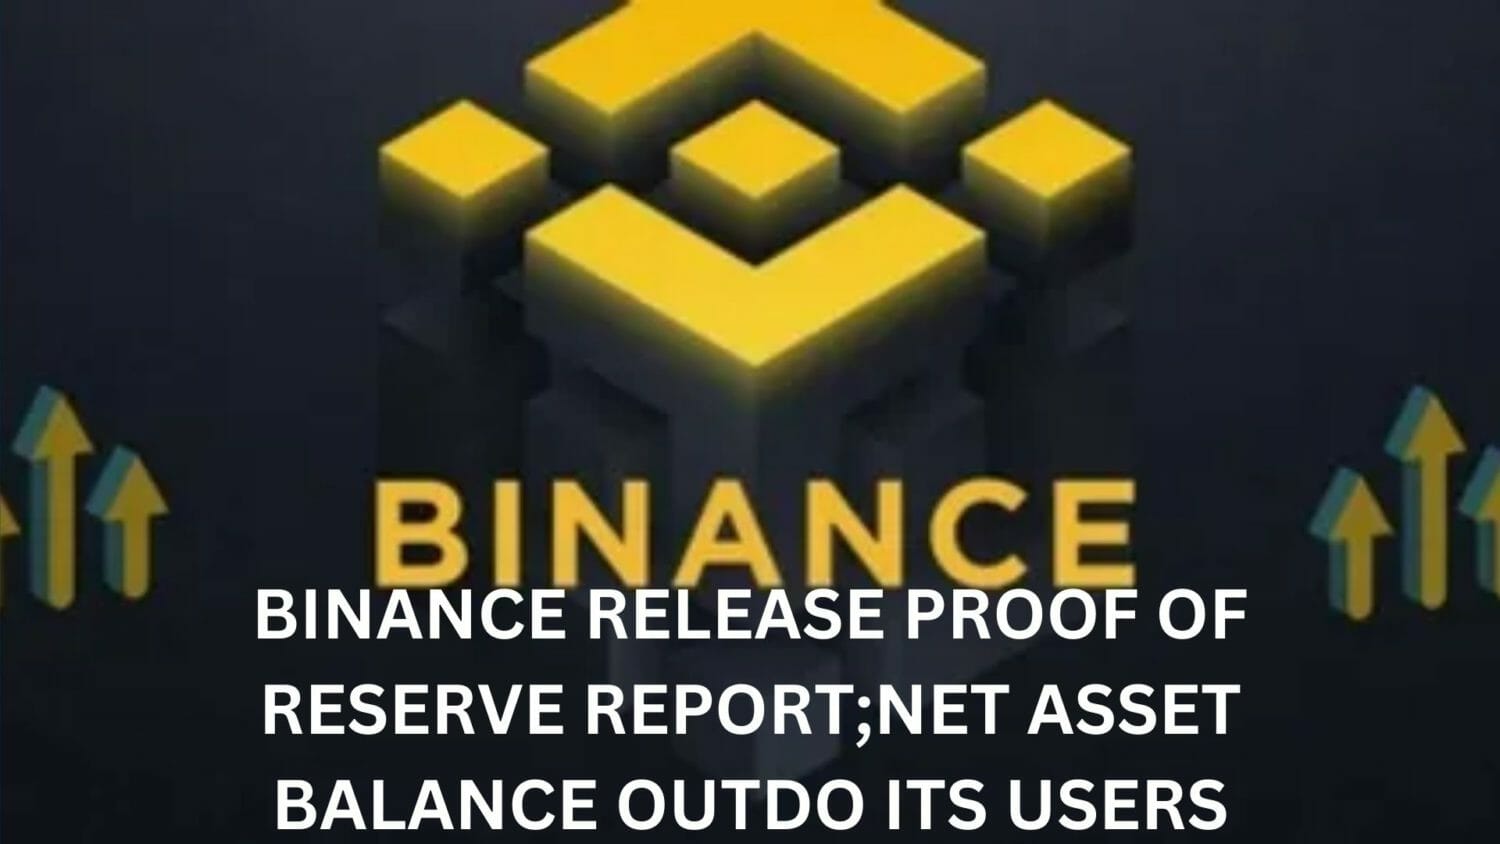 Binance Release Proof Of Reserve Report;Net Asset Balance Outdo Its Users